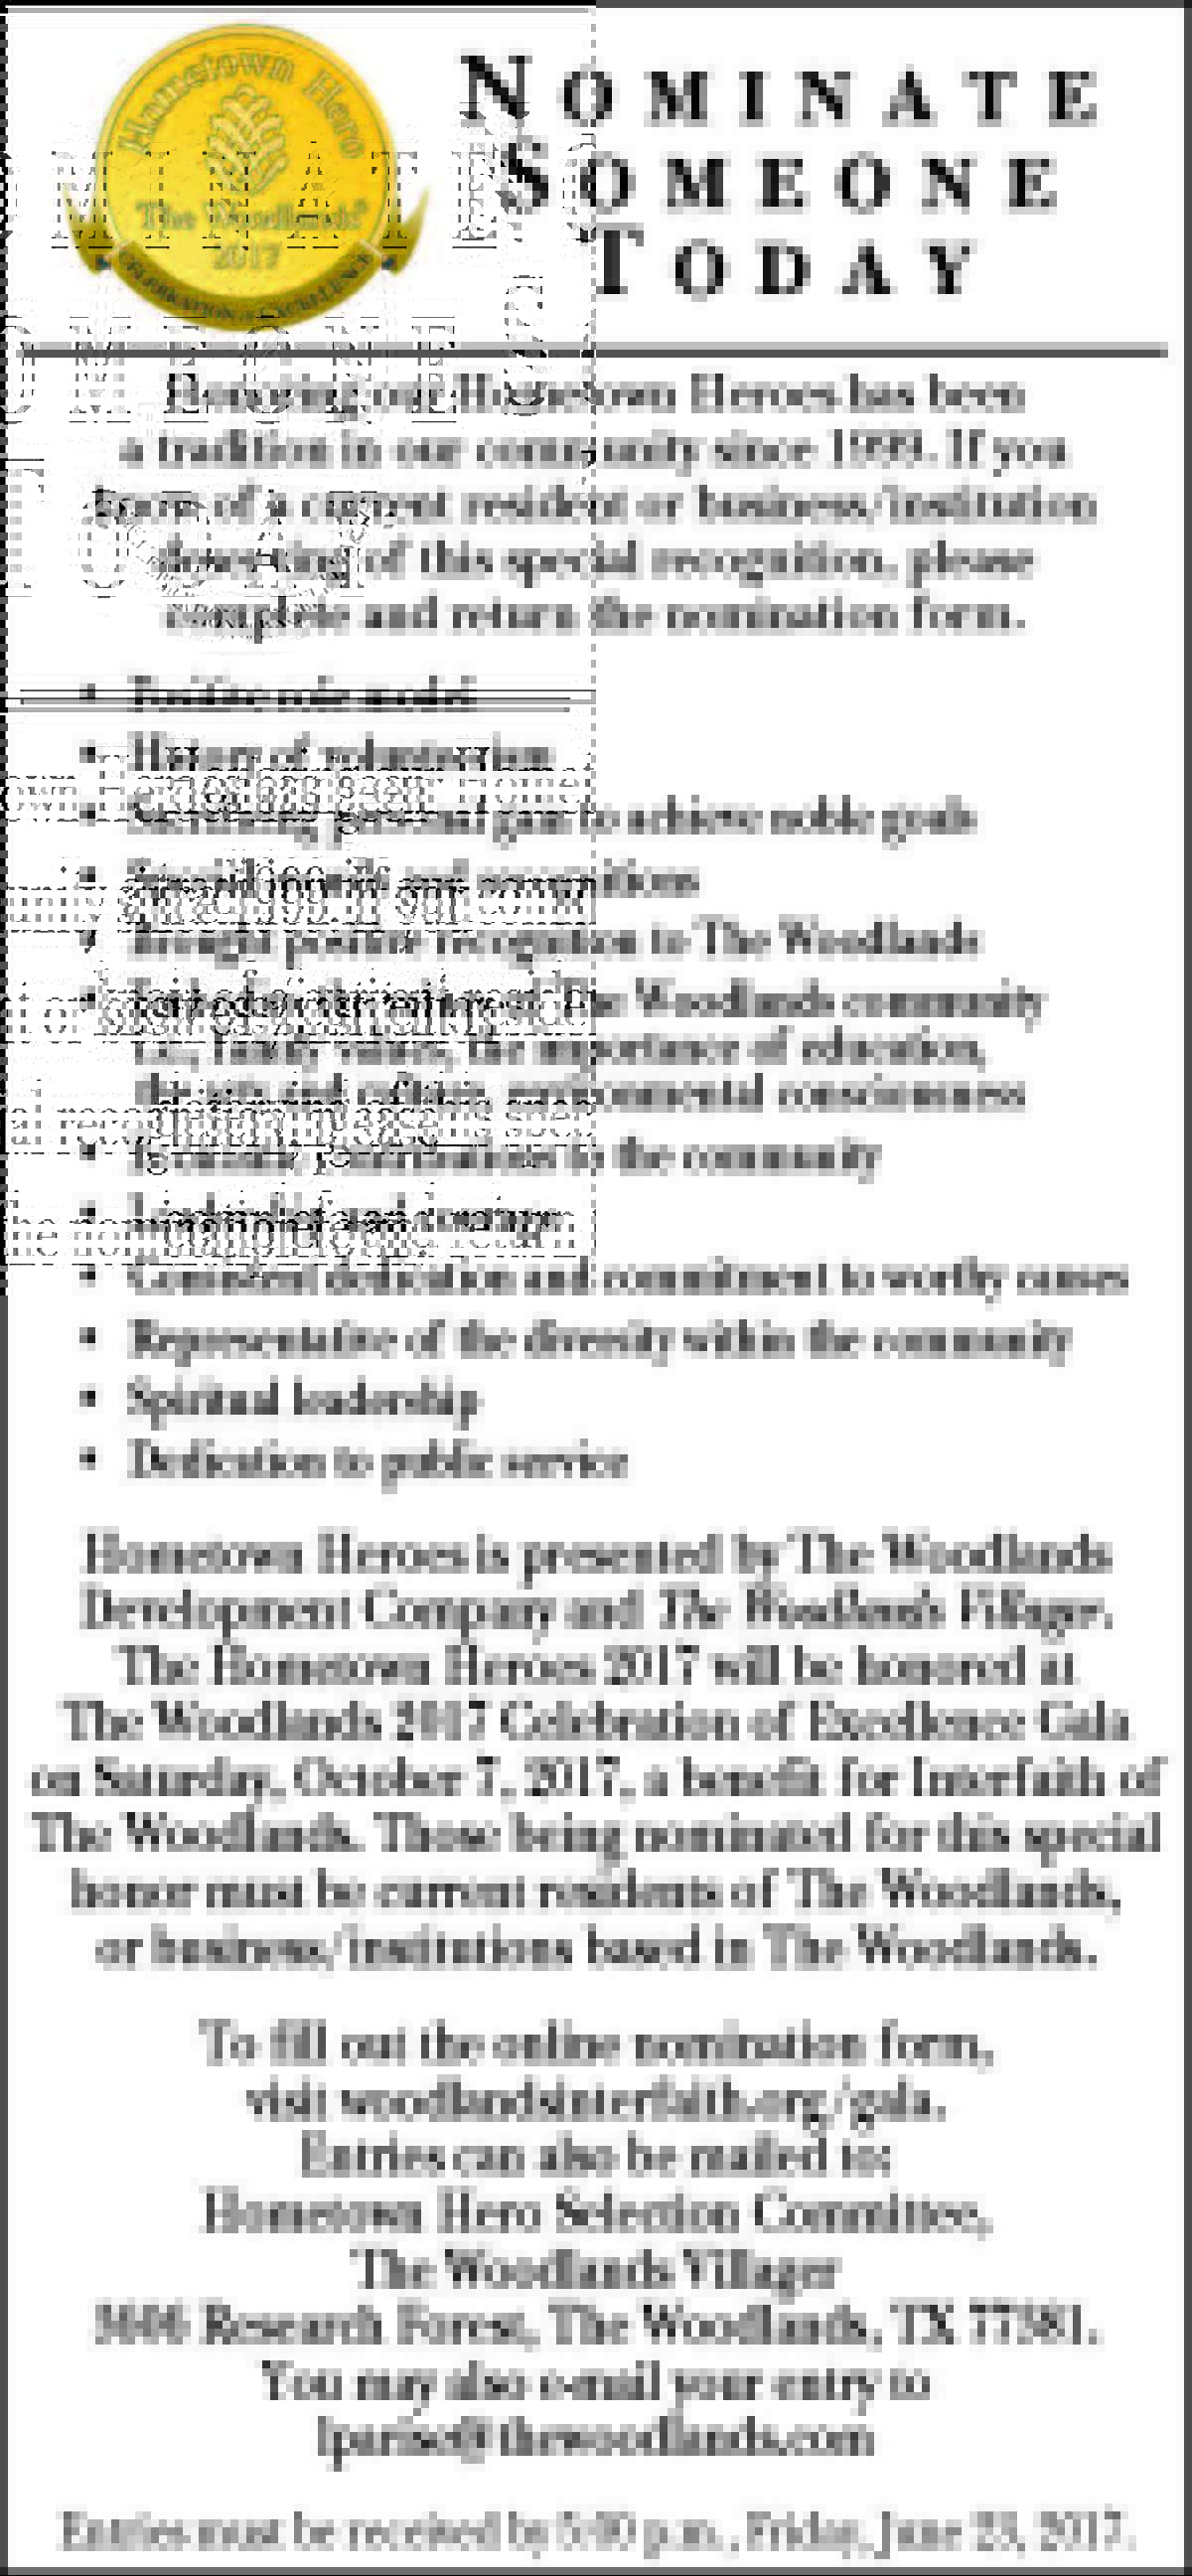 The 2017 Hometown Heroes will be honored at The Woodlands 2017 Celebration of Excellence Gala on Saturday, October 7, benefiting Interfaith of The Woodlands. Hometown Heroes nominees are current residents or businesses/institutions in The Woodlands who exemplify leadership, courage and dedication.